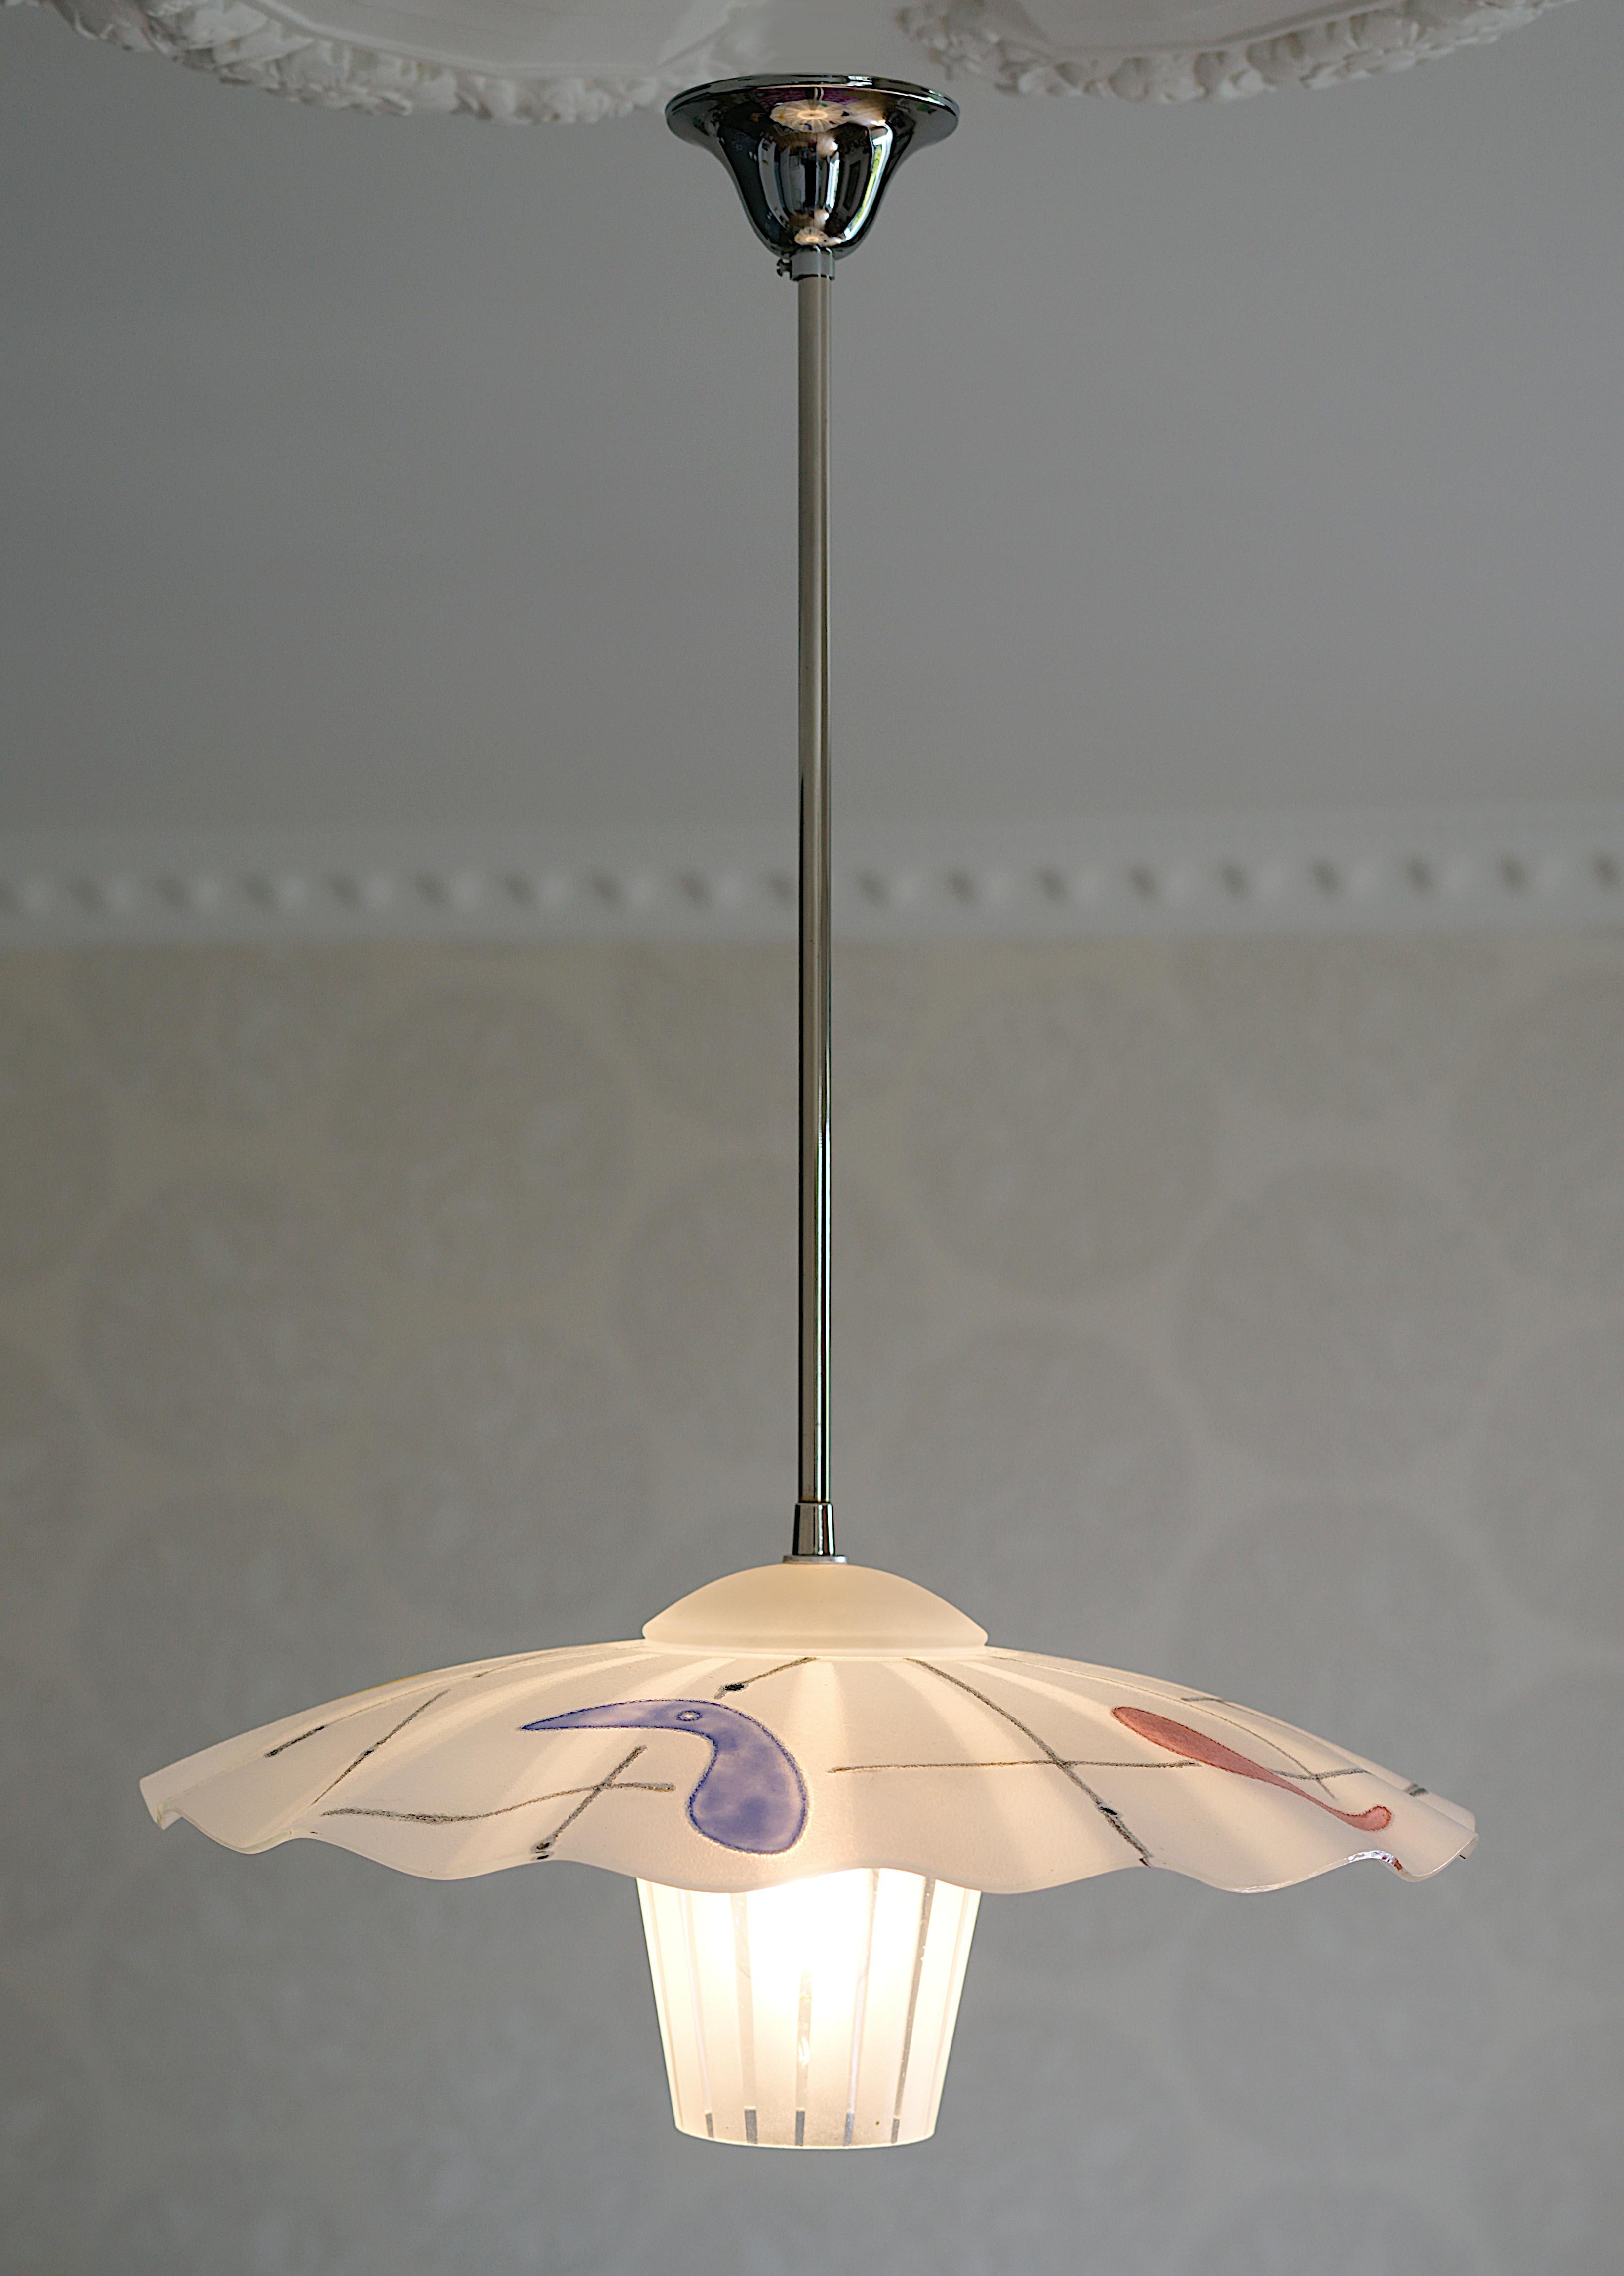 French Midcentury Pendant Chandelier, 1950s For Sale 3